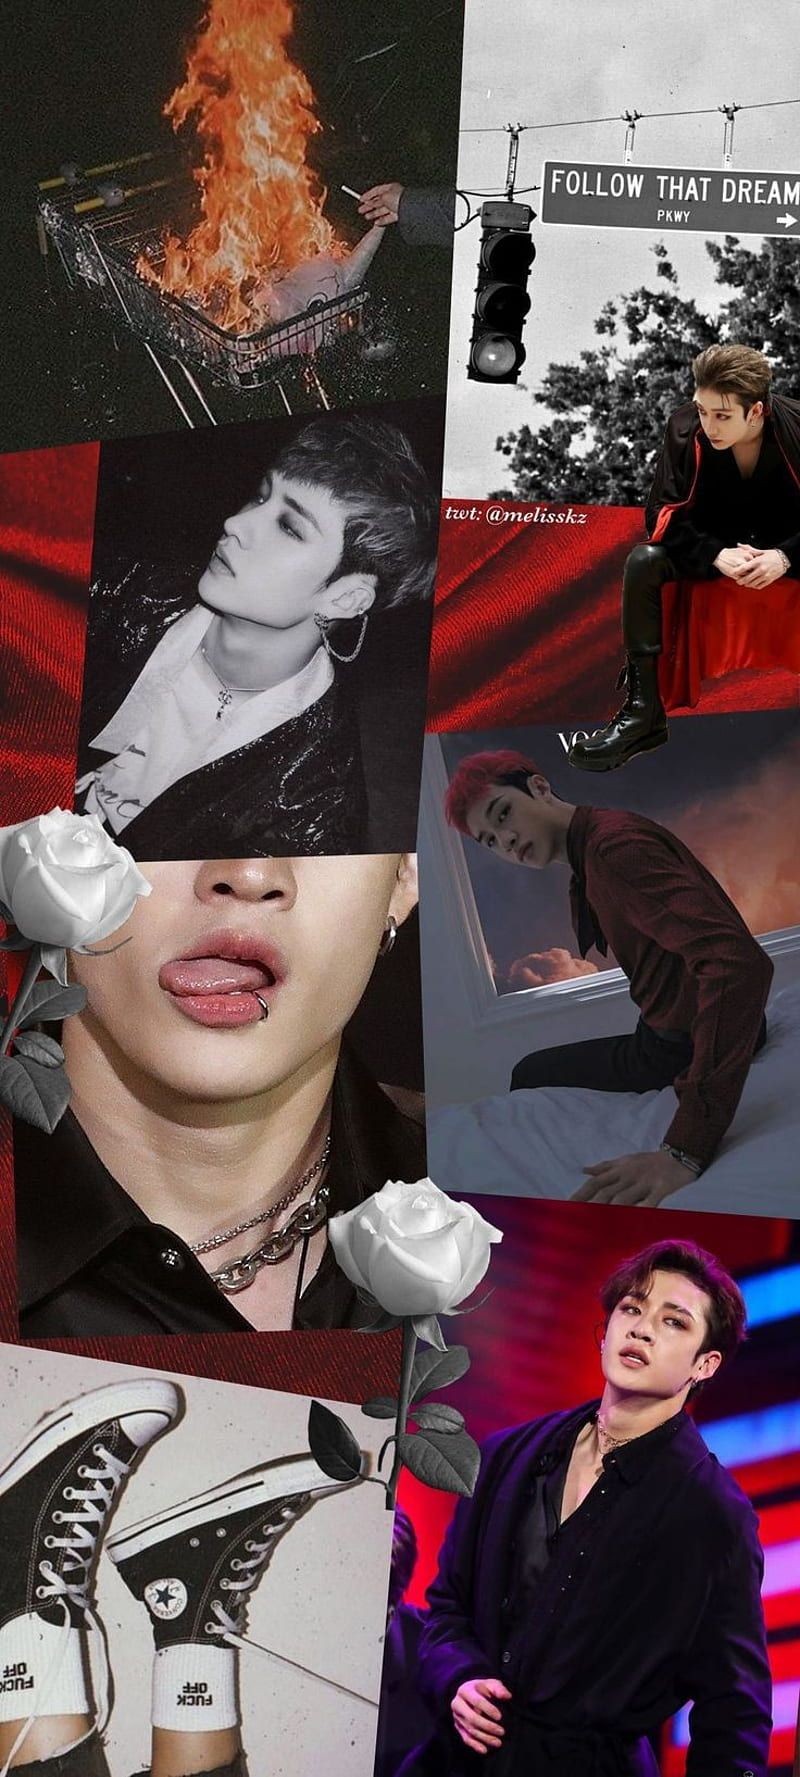 A collage of images of the K-pop group NCT 127, with images of members in black and white and red. - Bang Chan